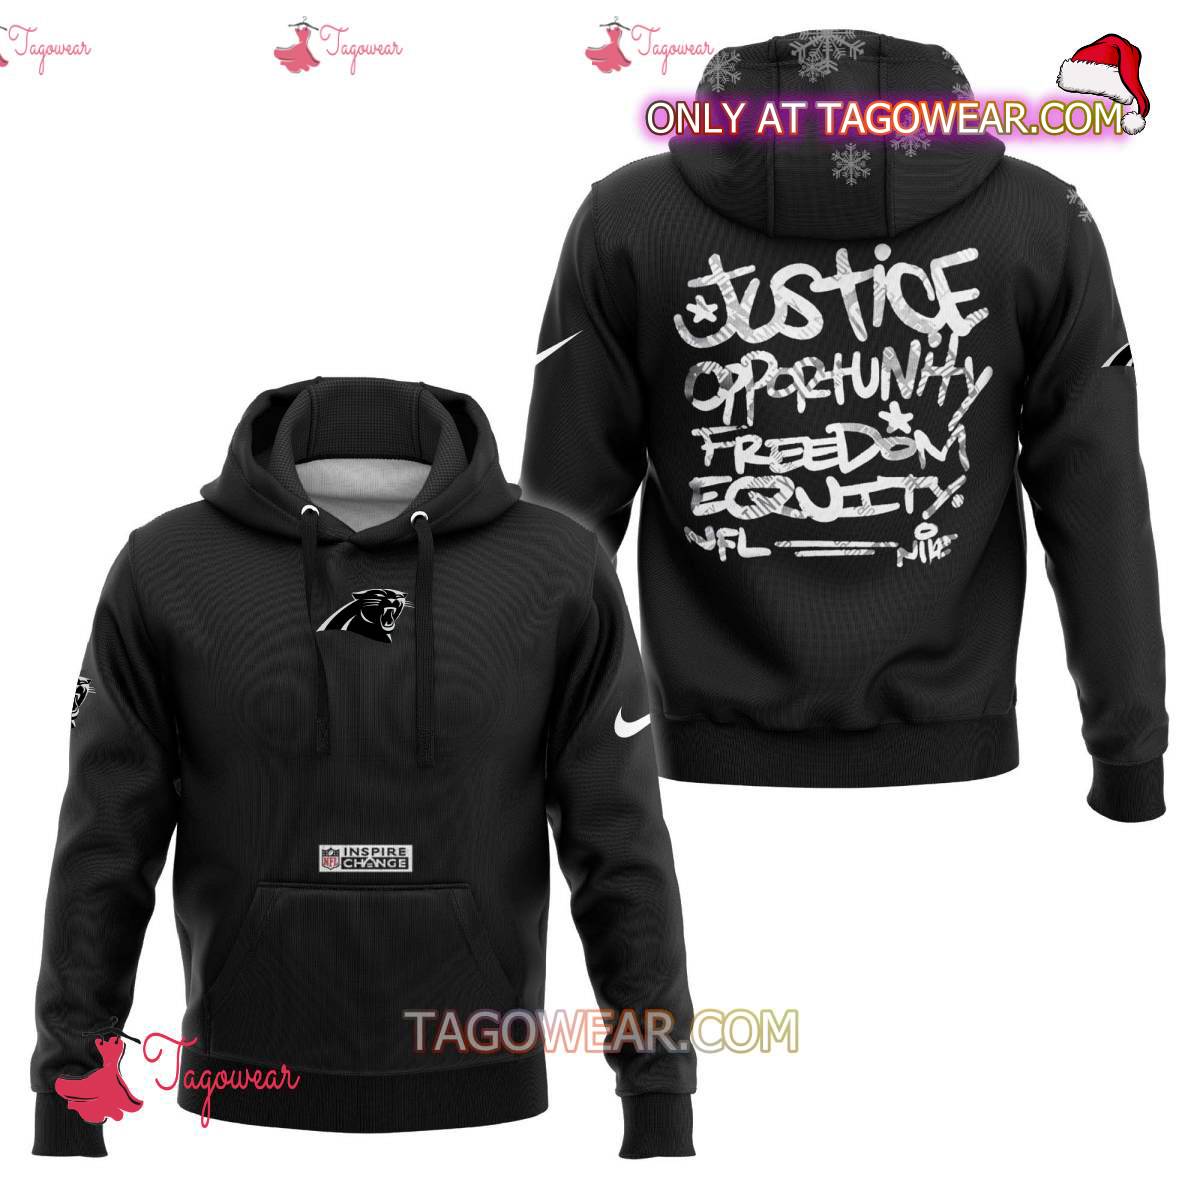 Carolina Panthers NFL Inspire Change Justice Opportunity Equality Freedom Hoodie